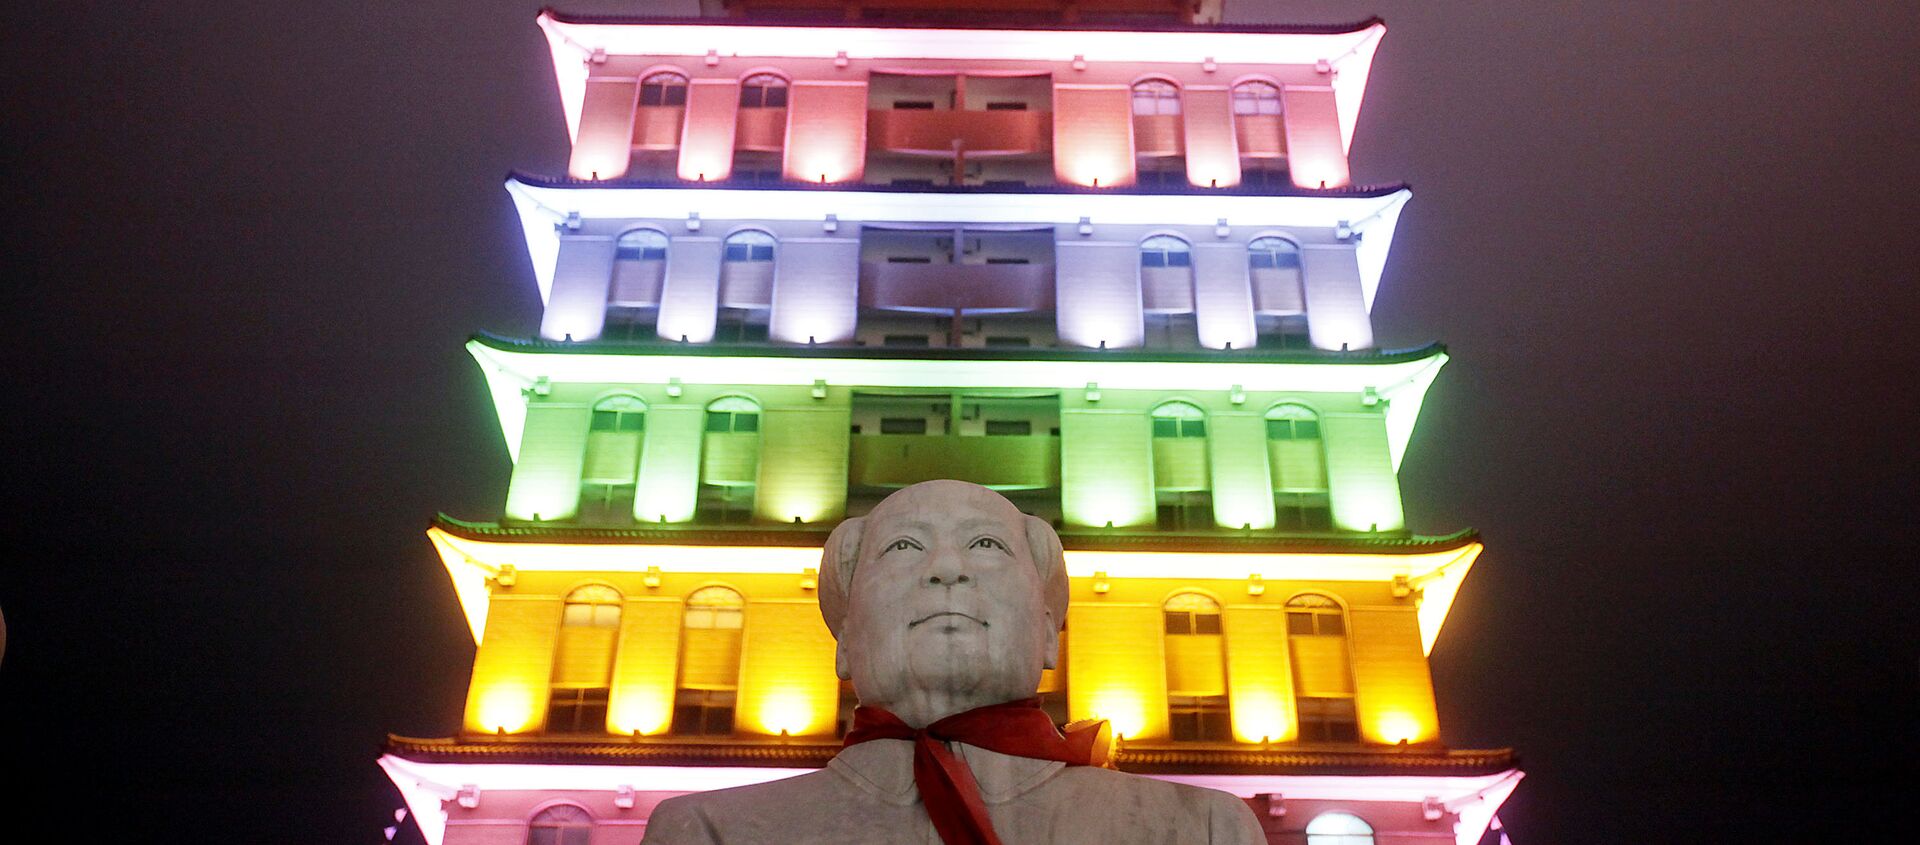 This Aug. 11, 2009 photo shows a statue of Mao Zedong in front of an illuminated pagoda-shape building in Huaxi, Jiangsu Province, China - Sputnik International, 1920, 13.02.2021